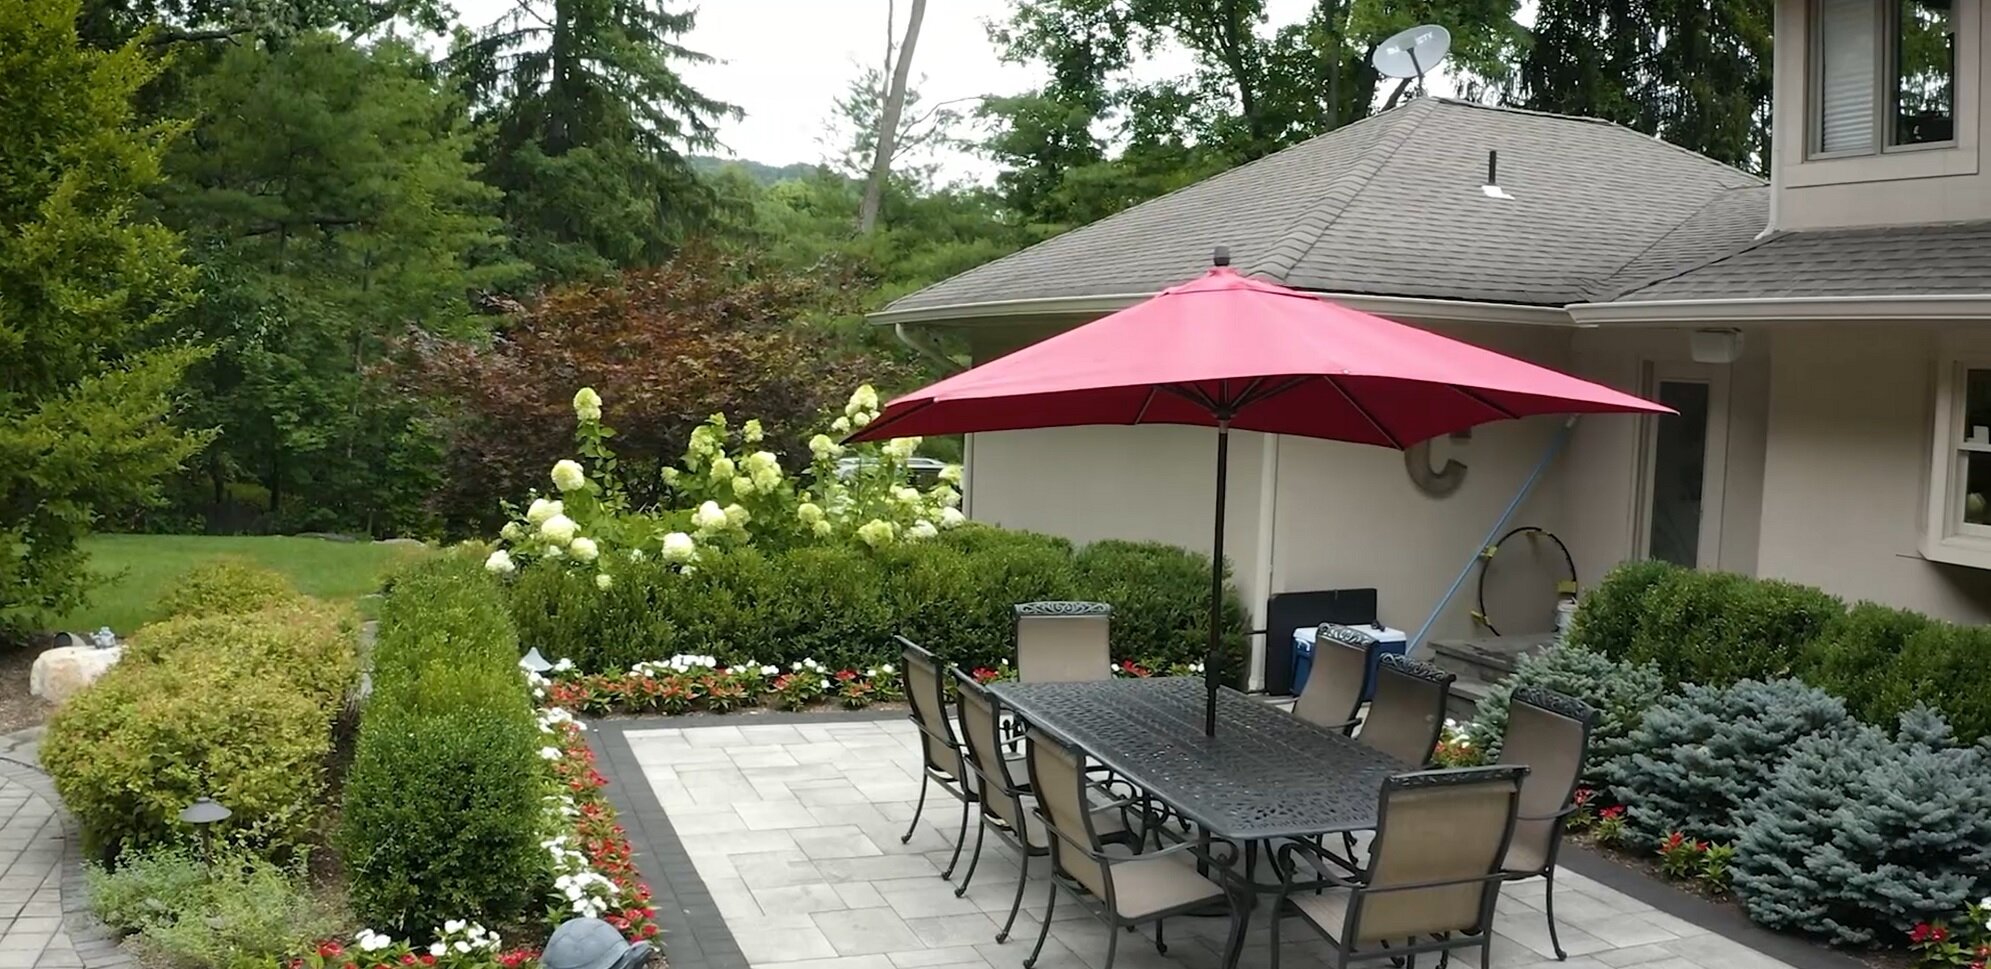 Paver patio and plantings in Mahwah, NJ